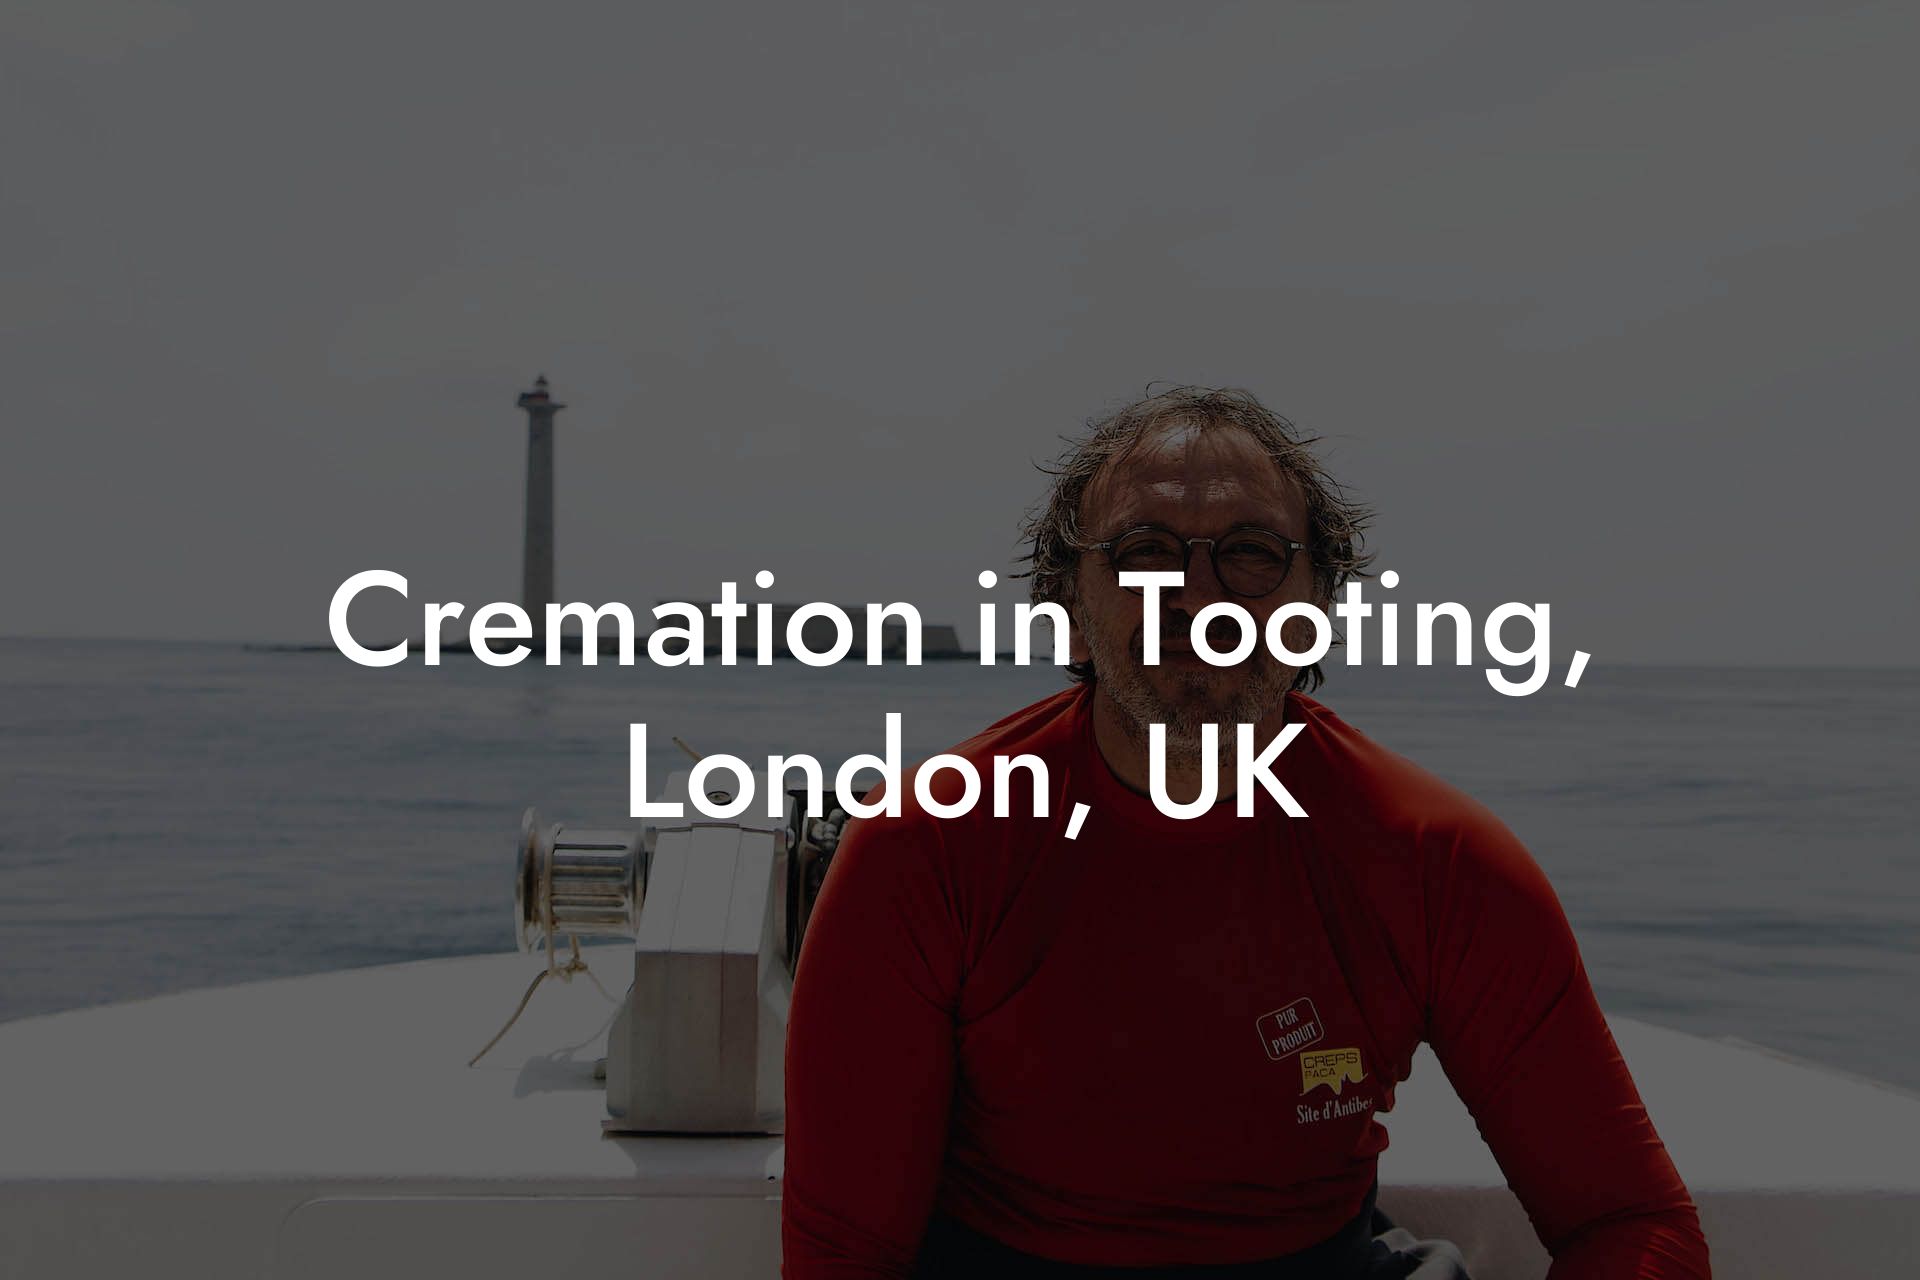 Cremation in Tooting, London, UK